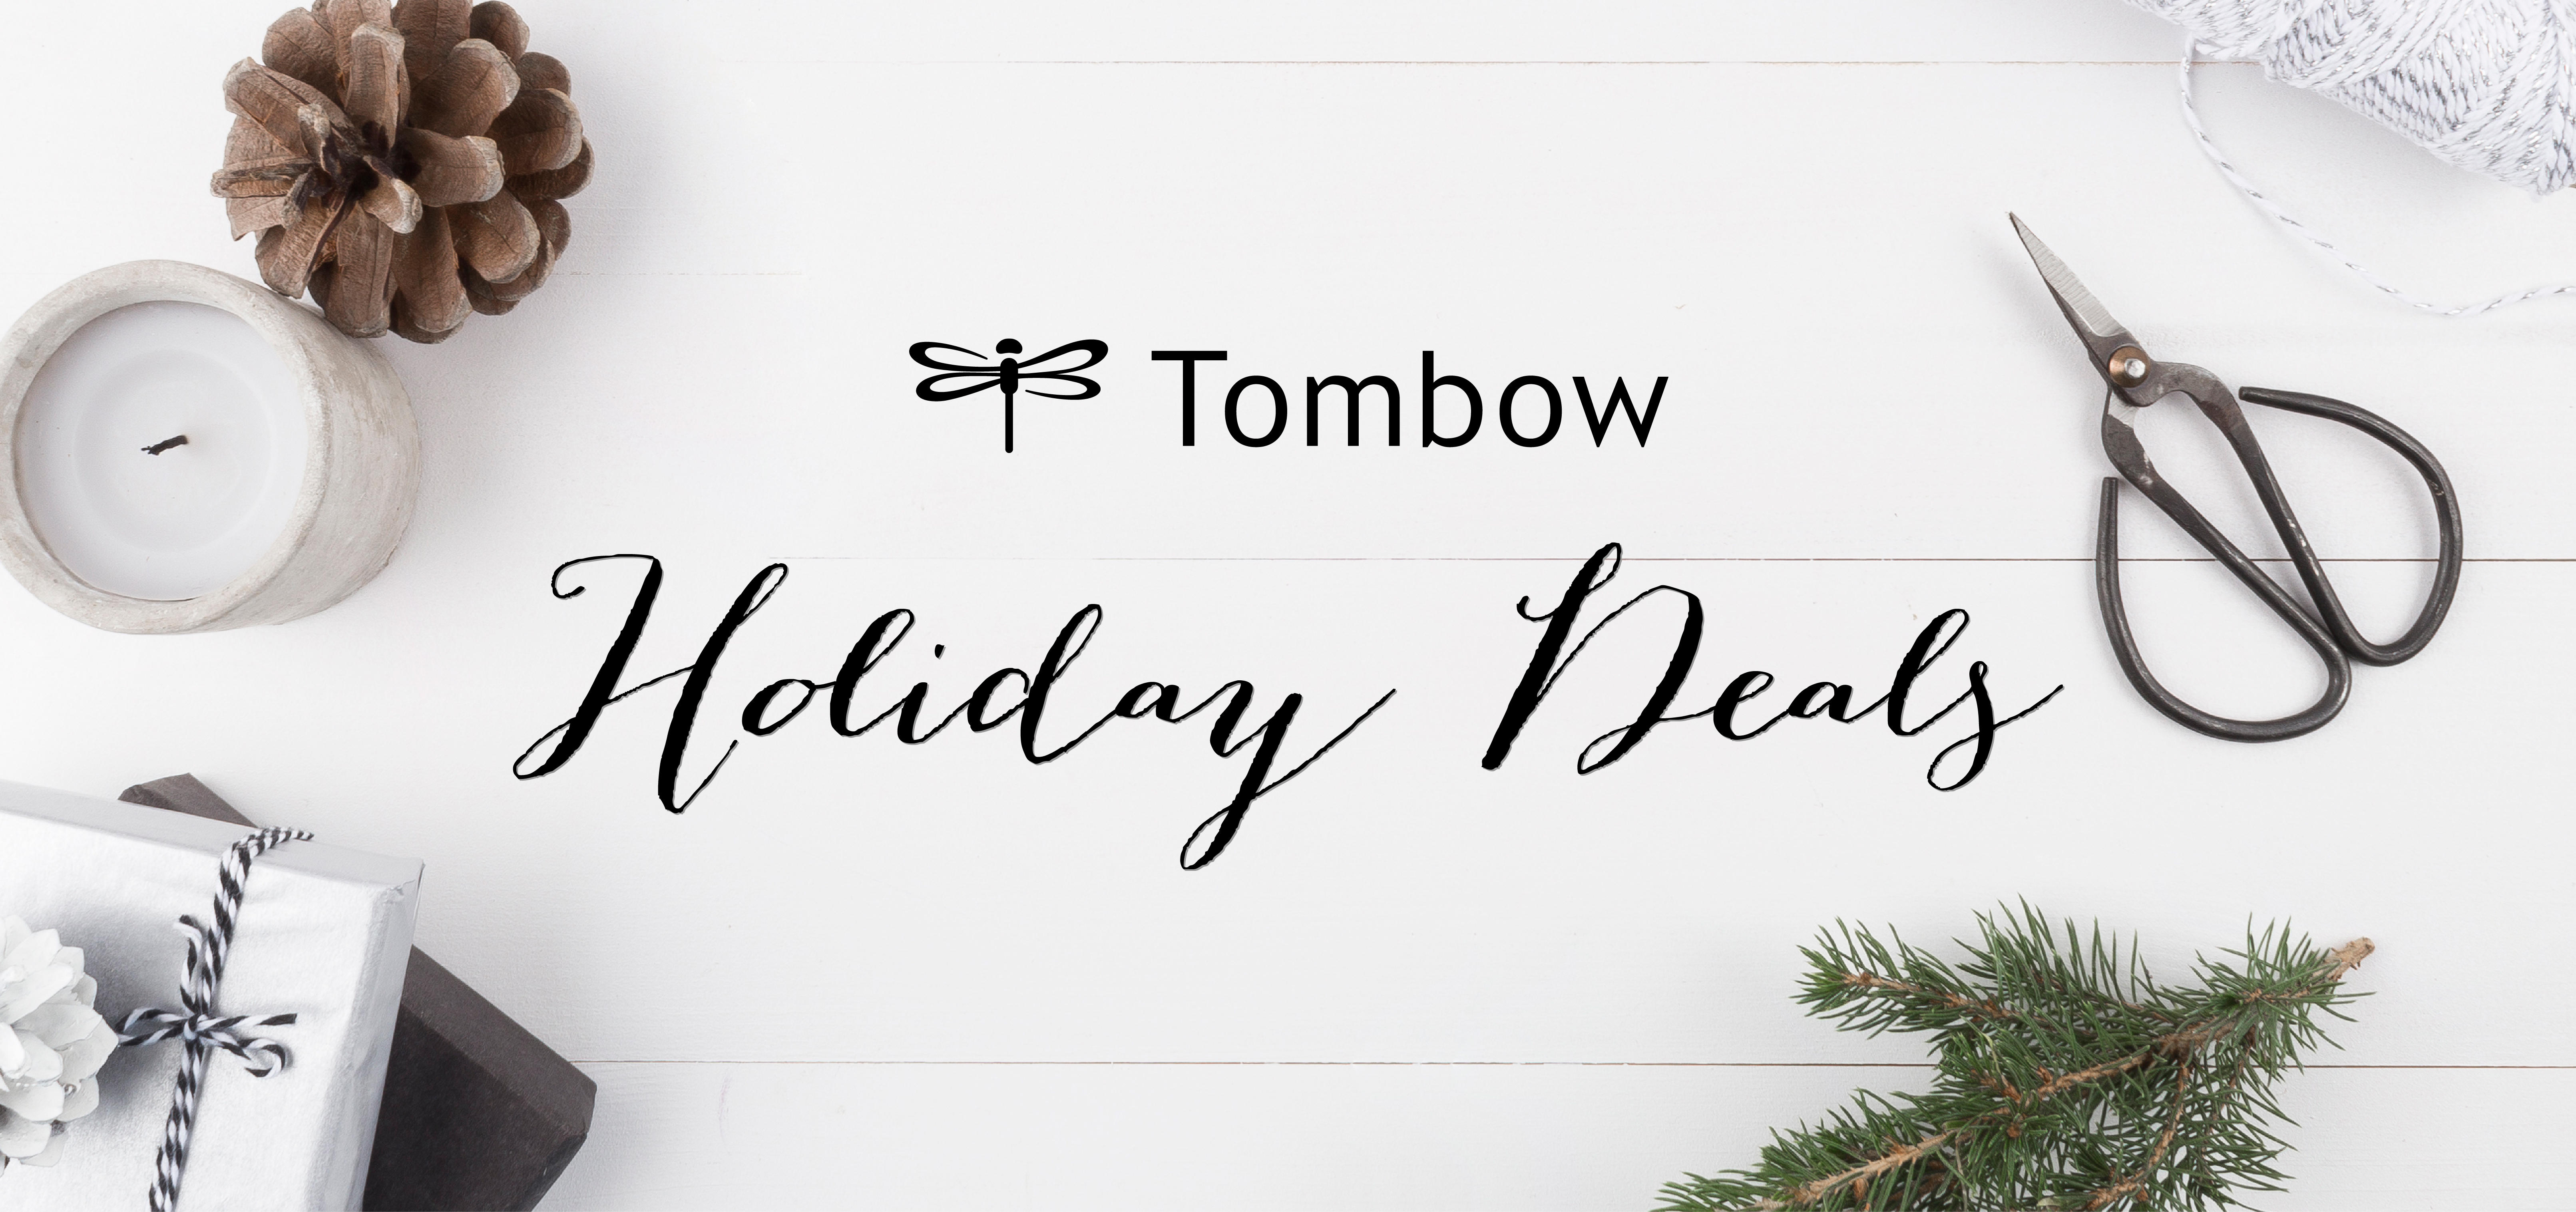 Deals on Tombow for the holidays